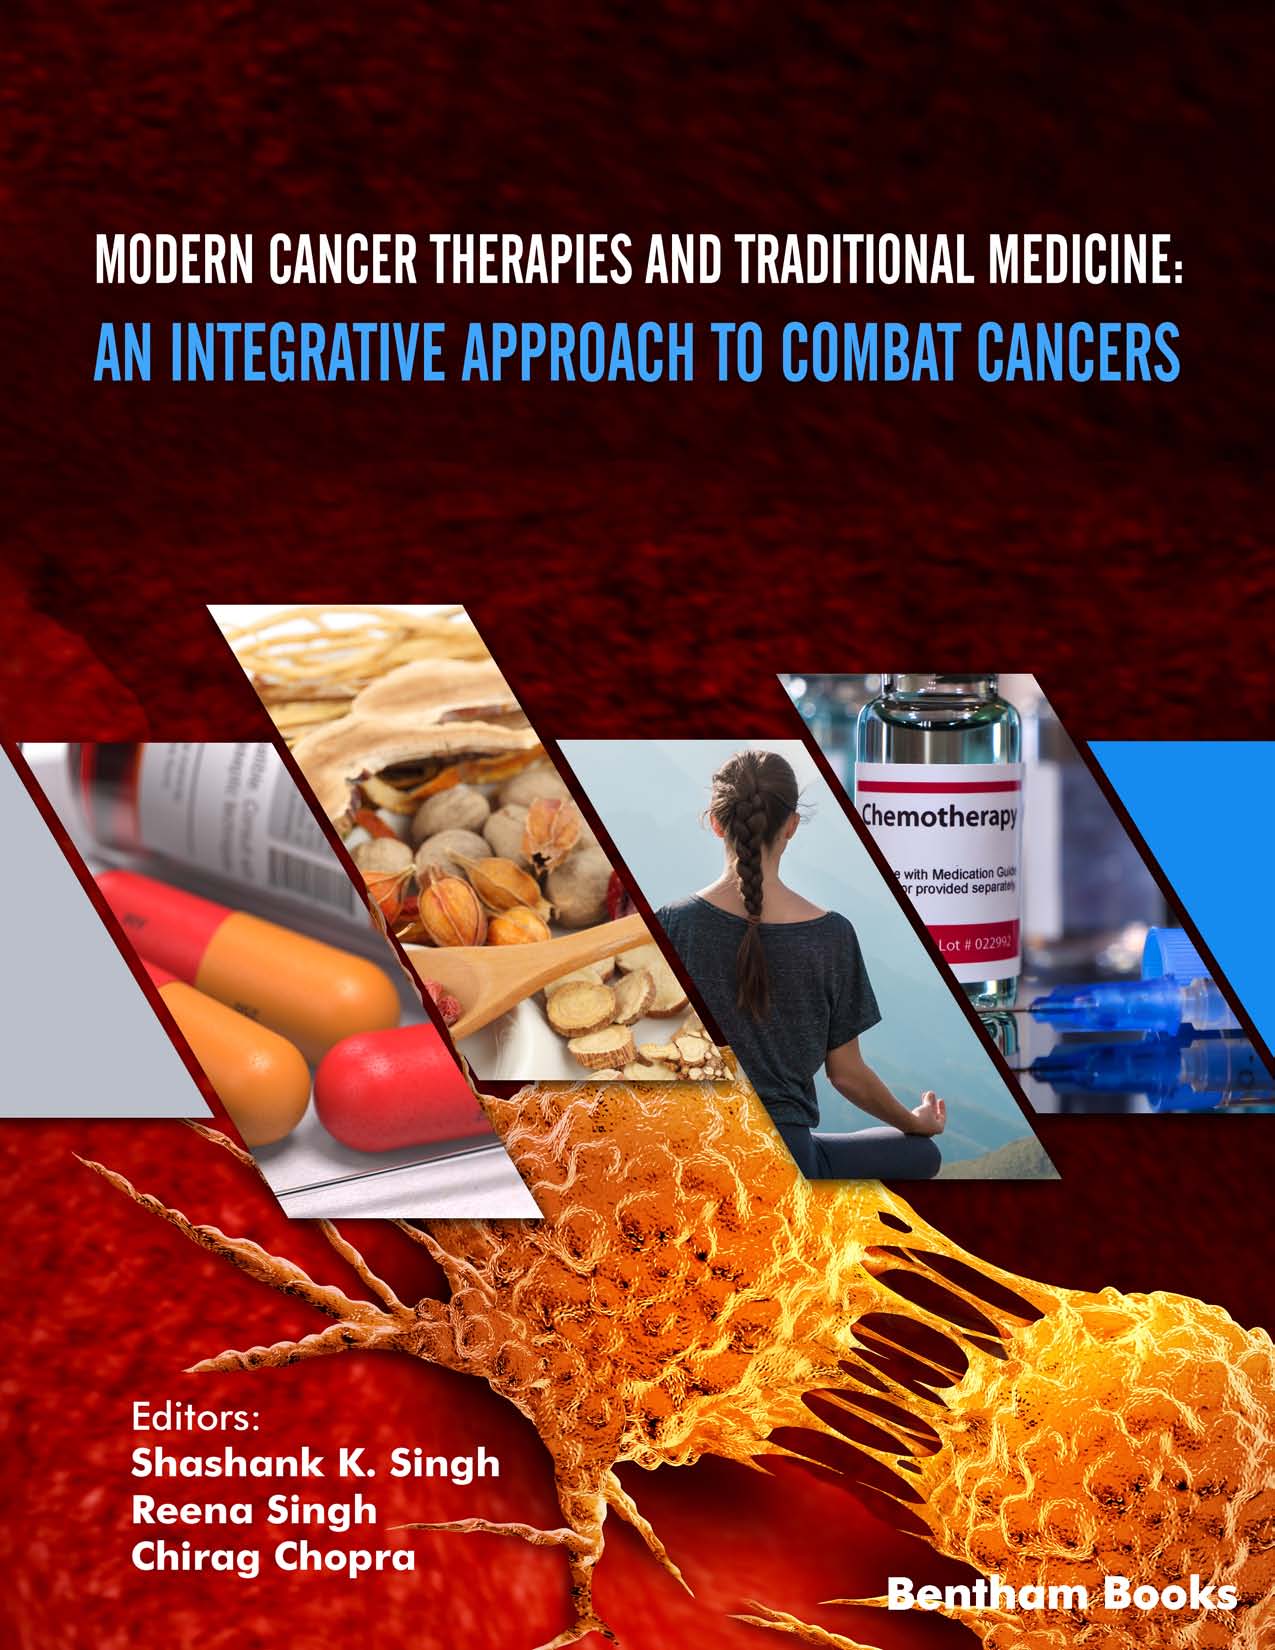 Modern Cancer Therapies and Traditional Medicine: An Integrative Approach to Combat Cancers